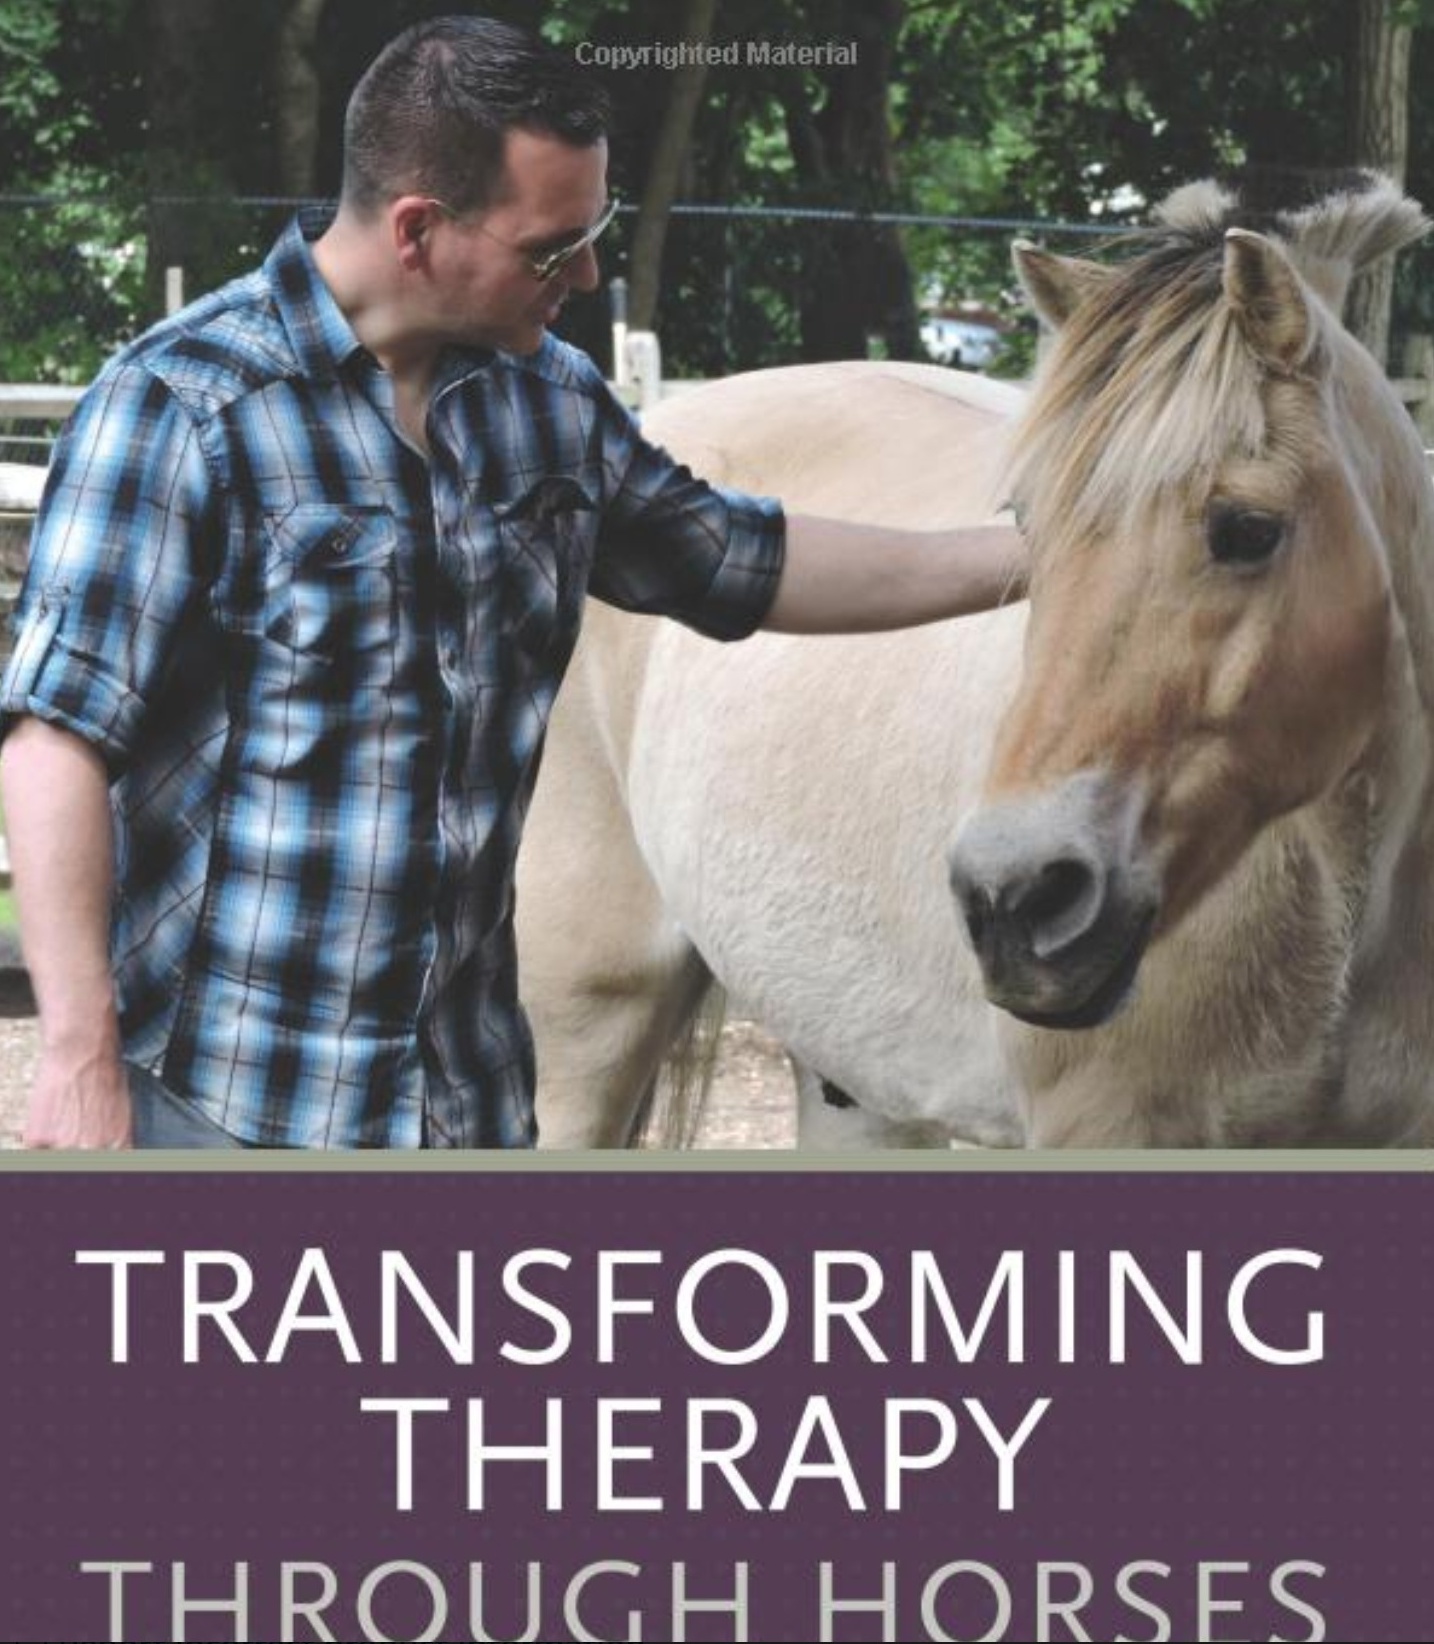 Therapy Through Horses